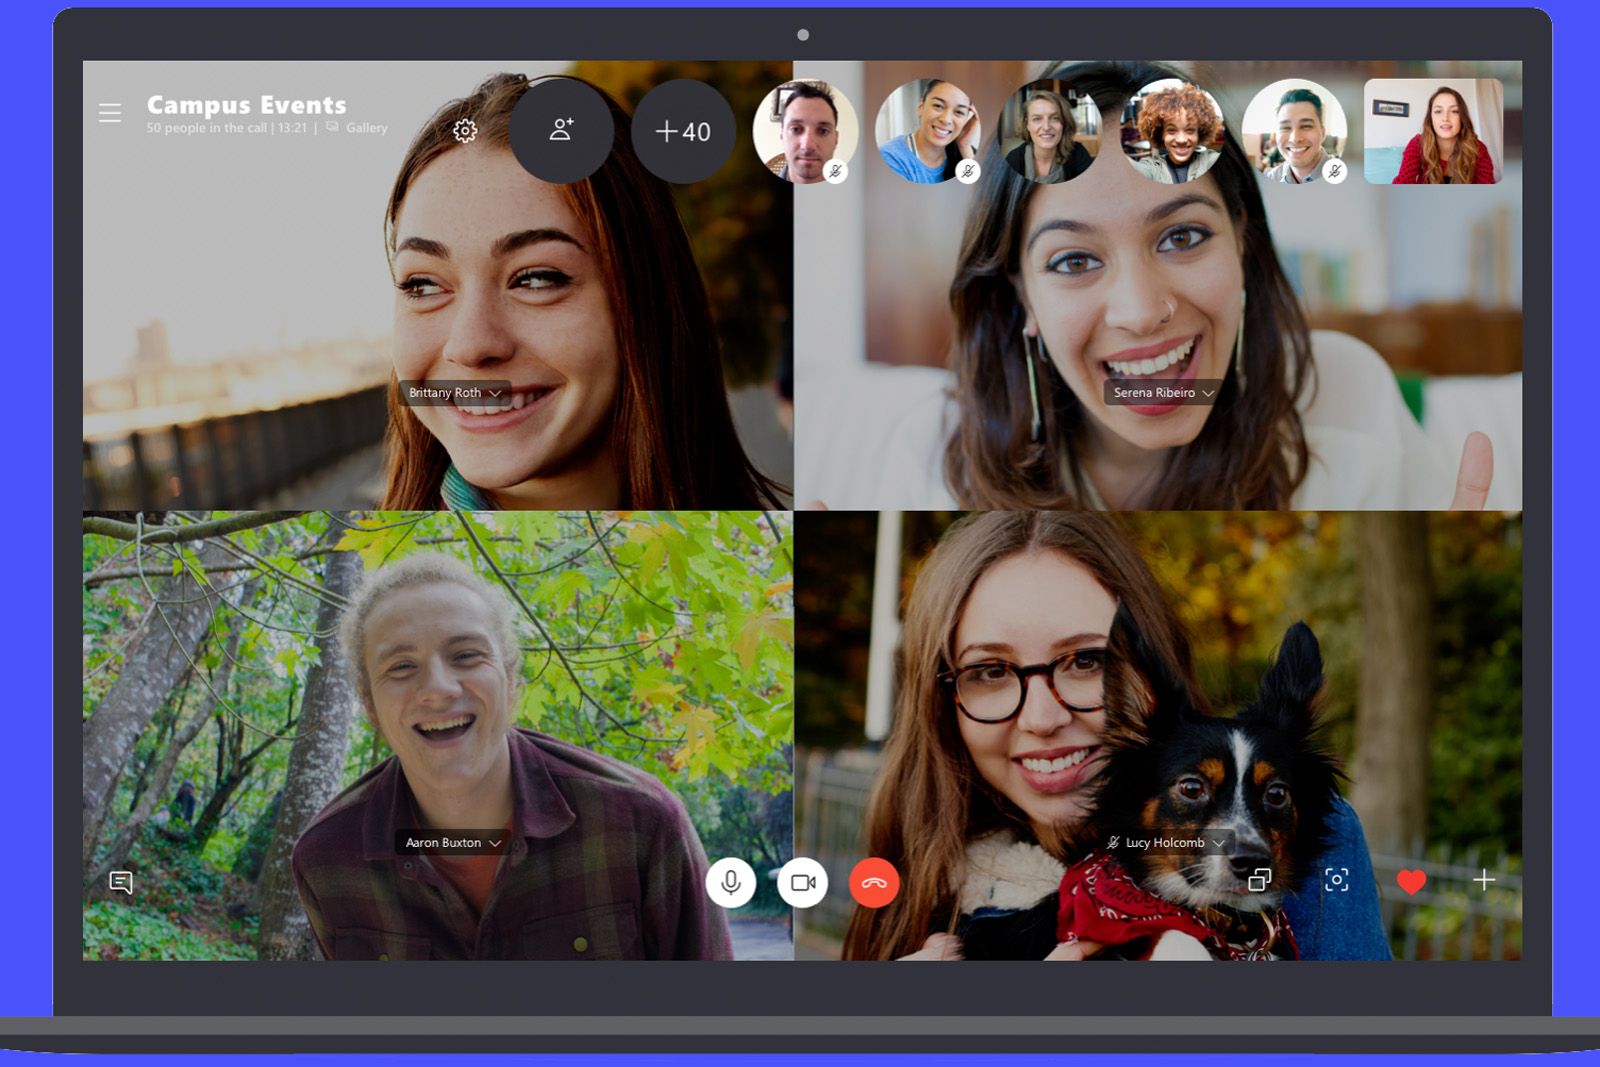 If you can find 50 people you can now call them all at once with Skype image 1